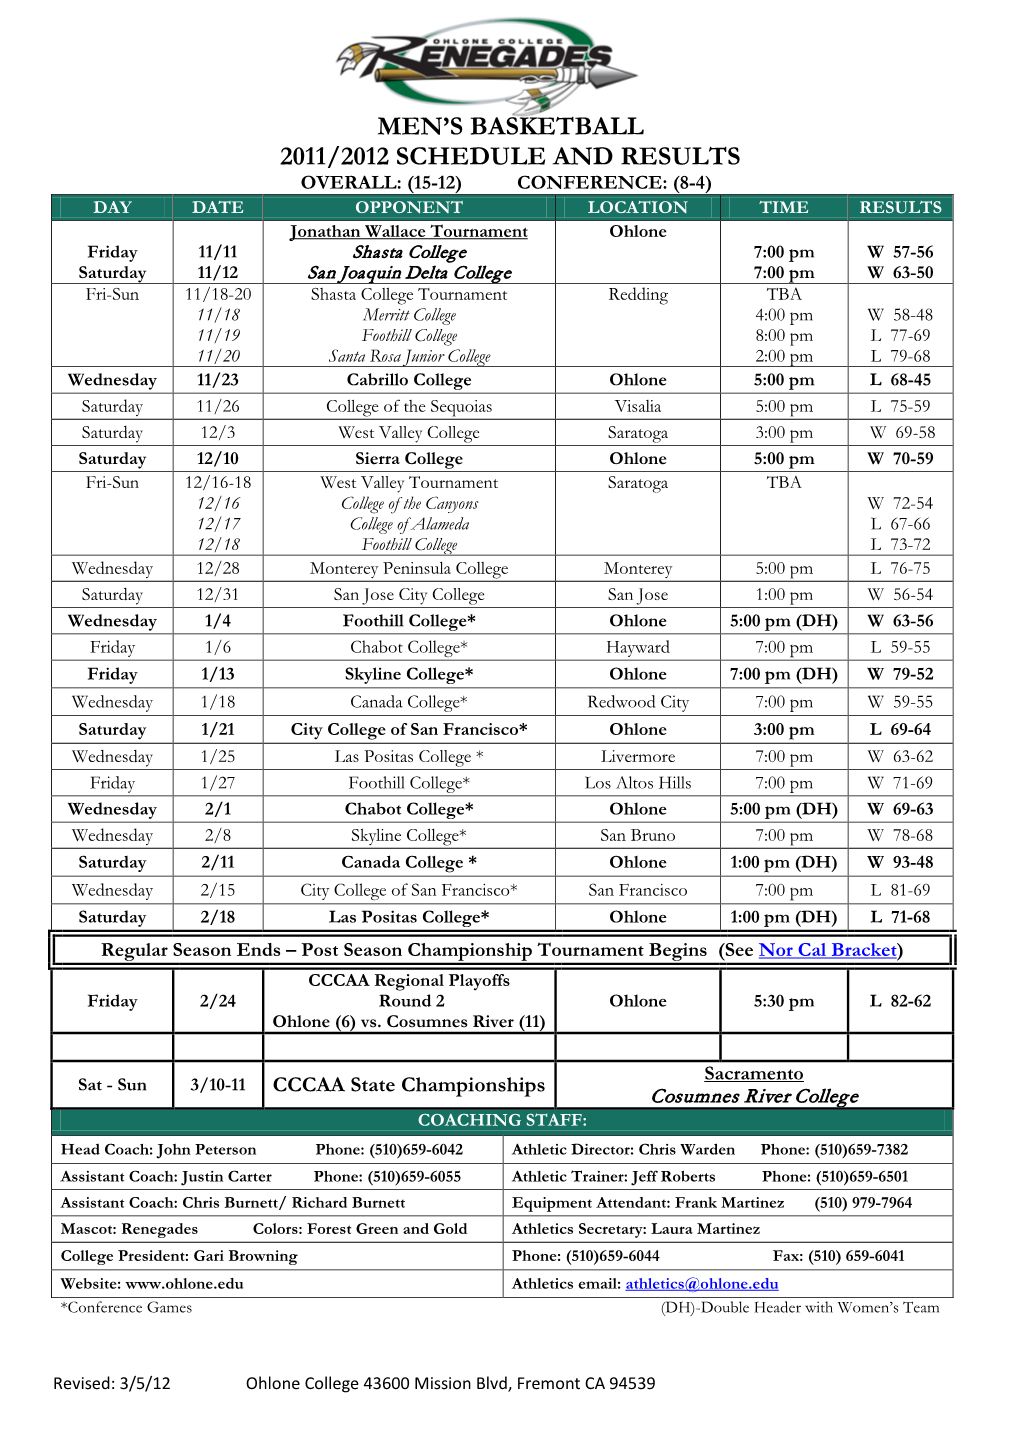 Men's Basketball 2011/2012 Schedule and Results